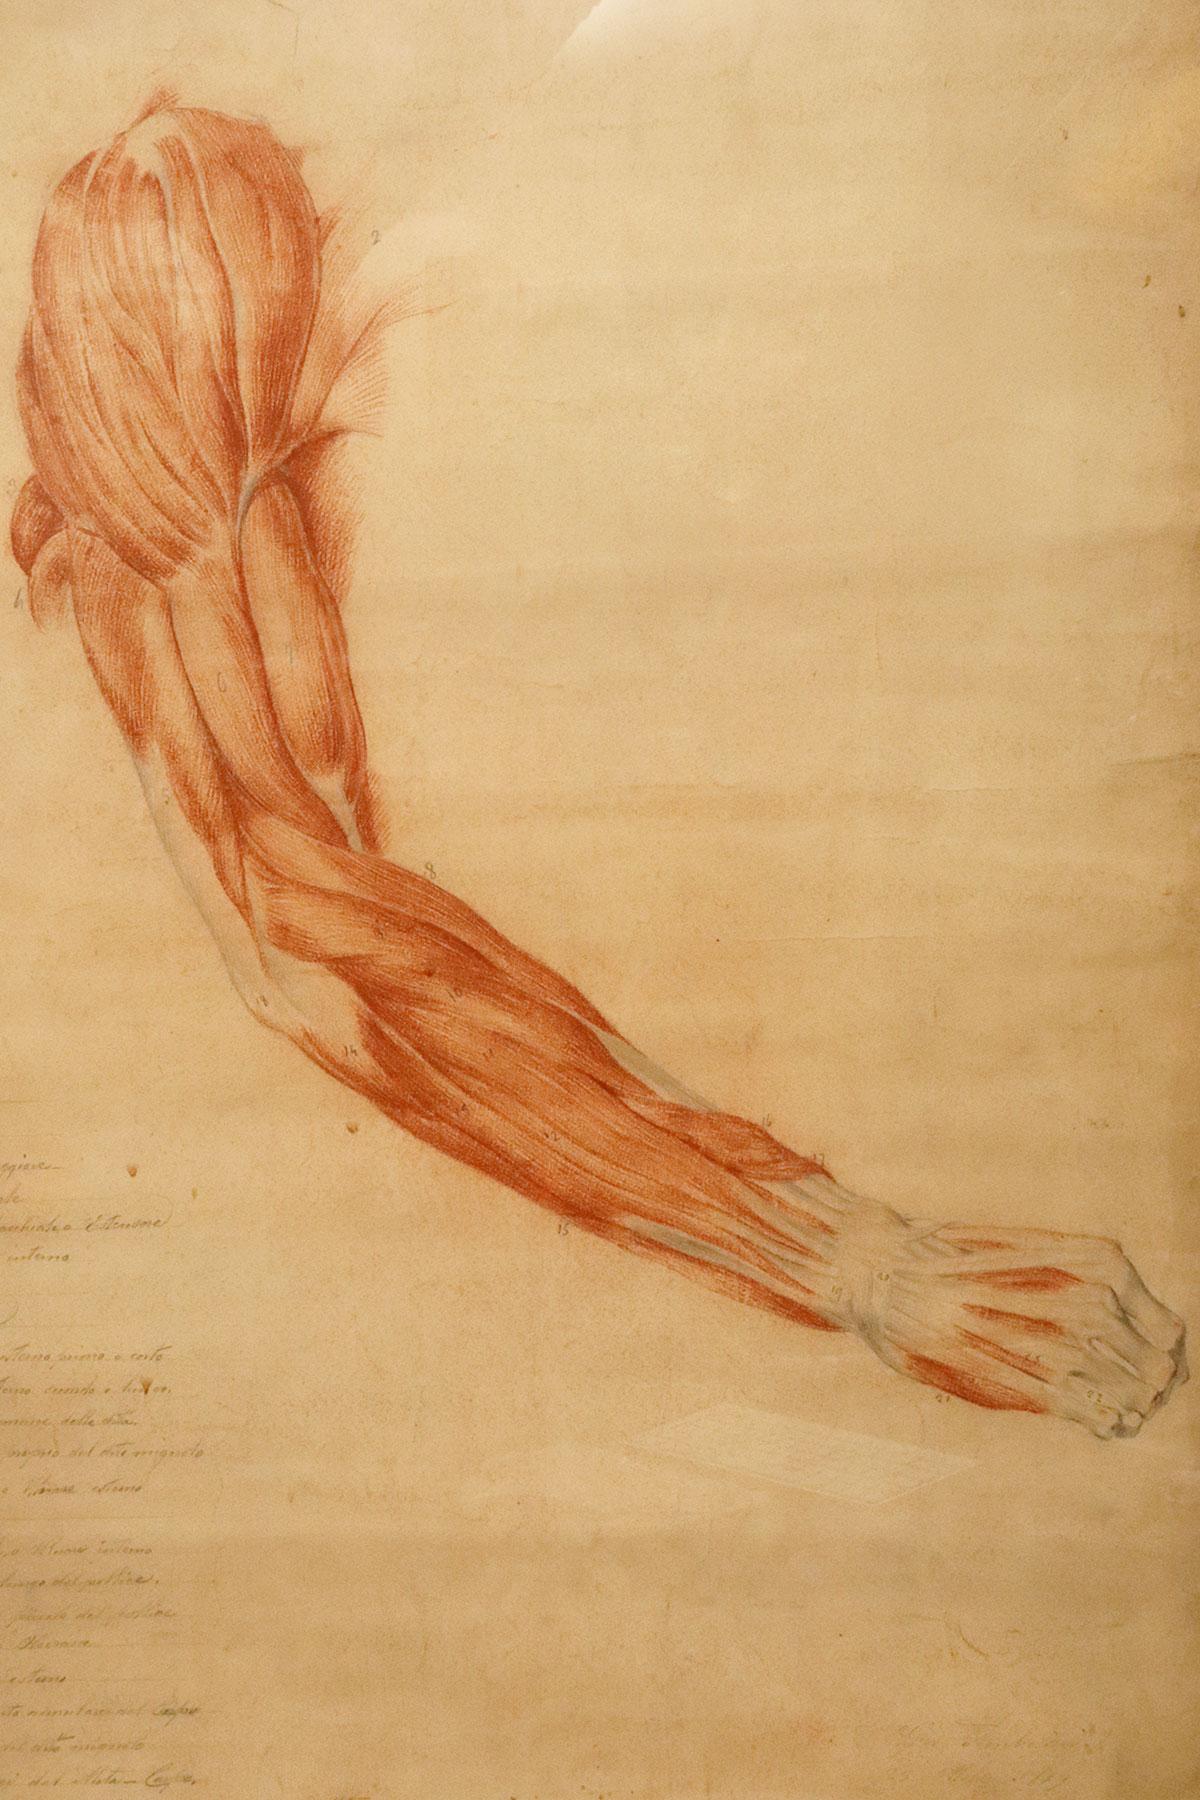 Italian Anatomical drawing of an upper limb, made in pencil and sanguine, Italy 1889. For Sale